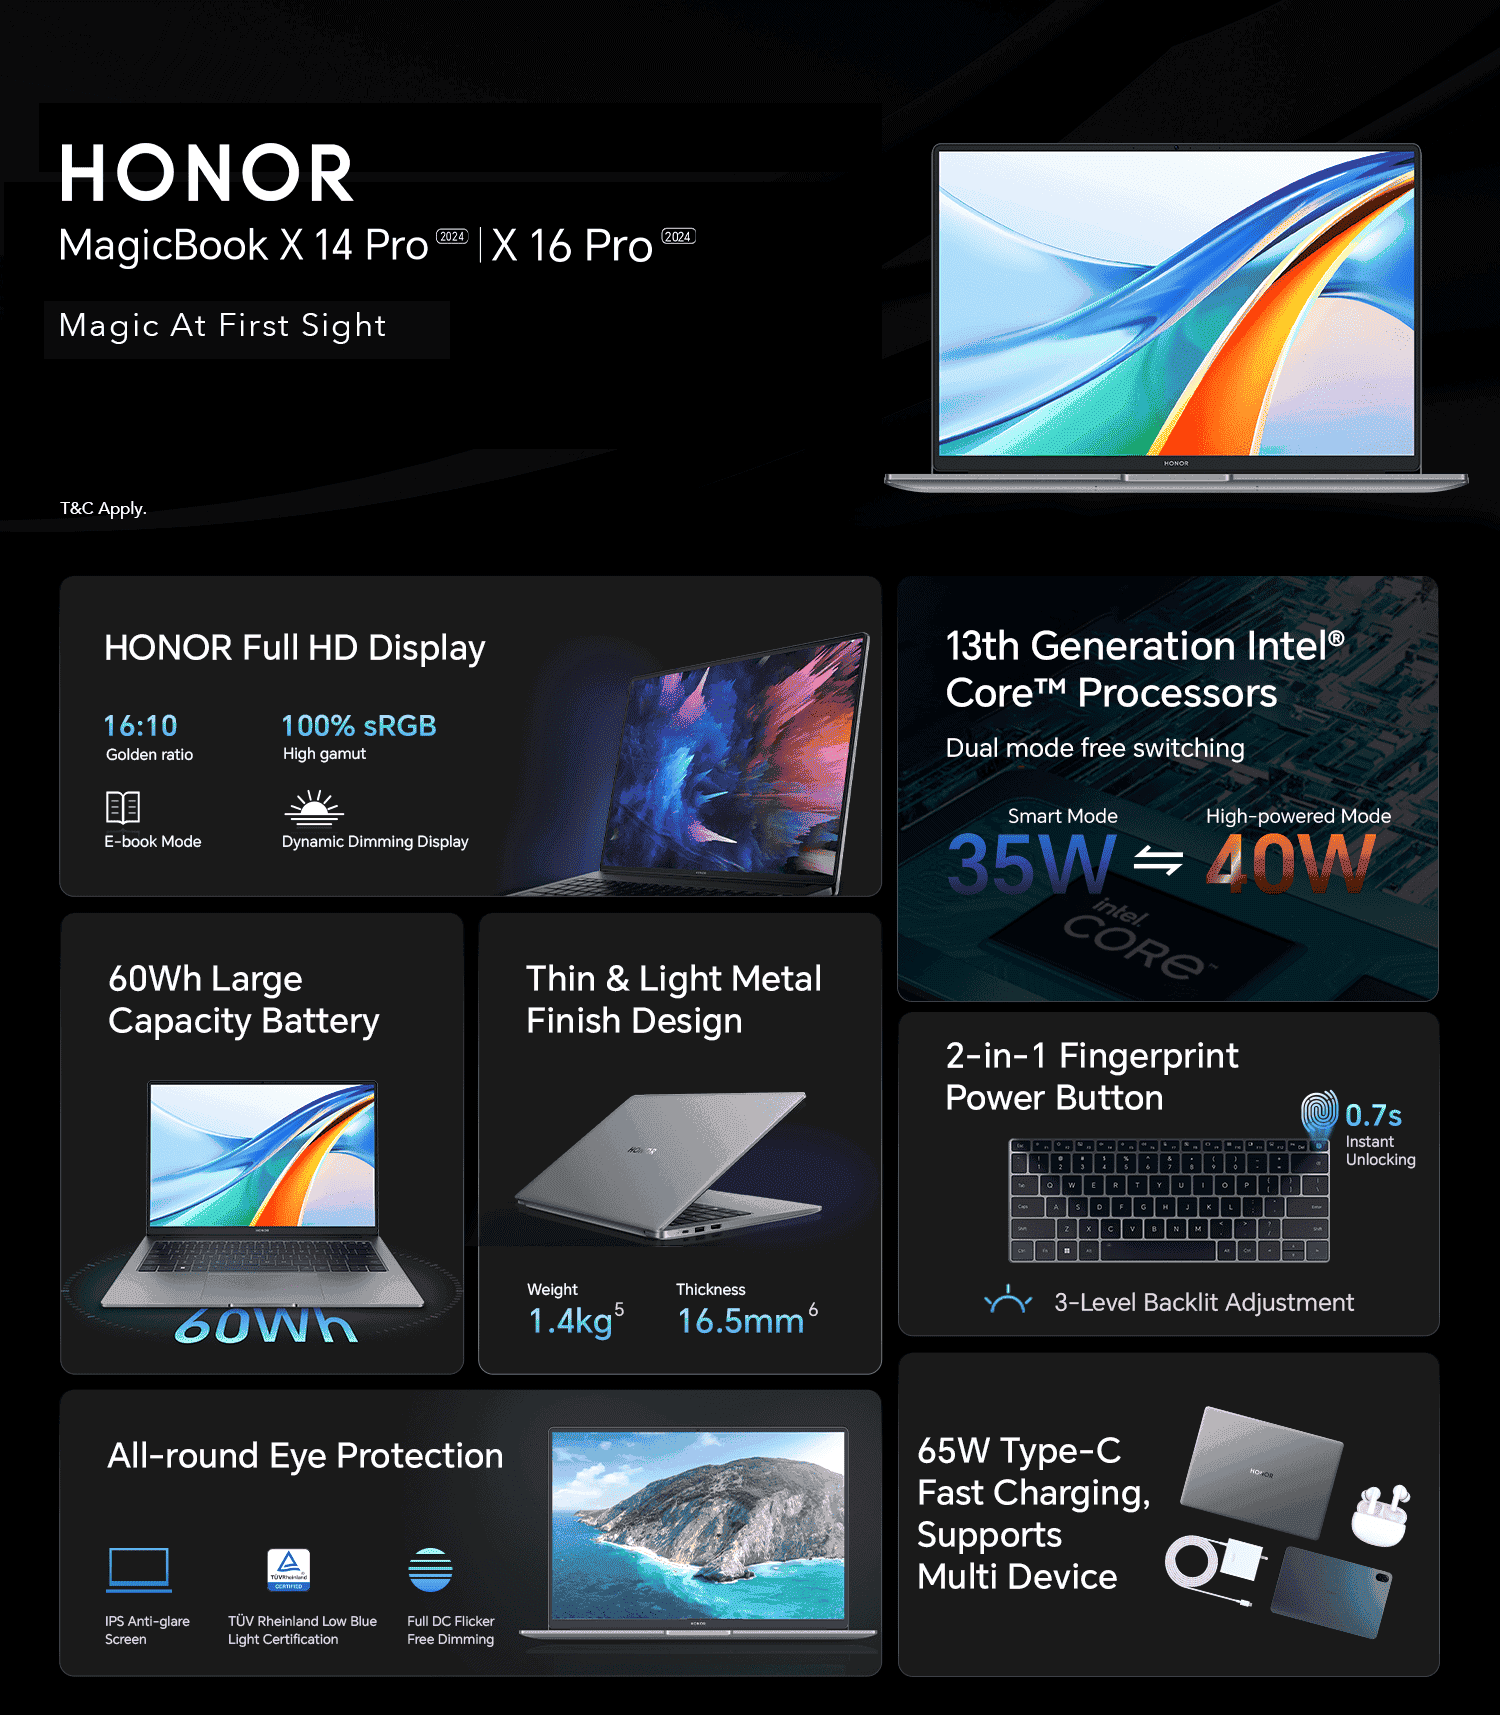 HONOR MagicBook X 14 and X 16 Pro Highlights